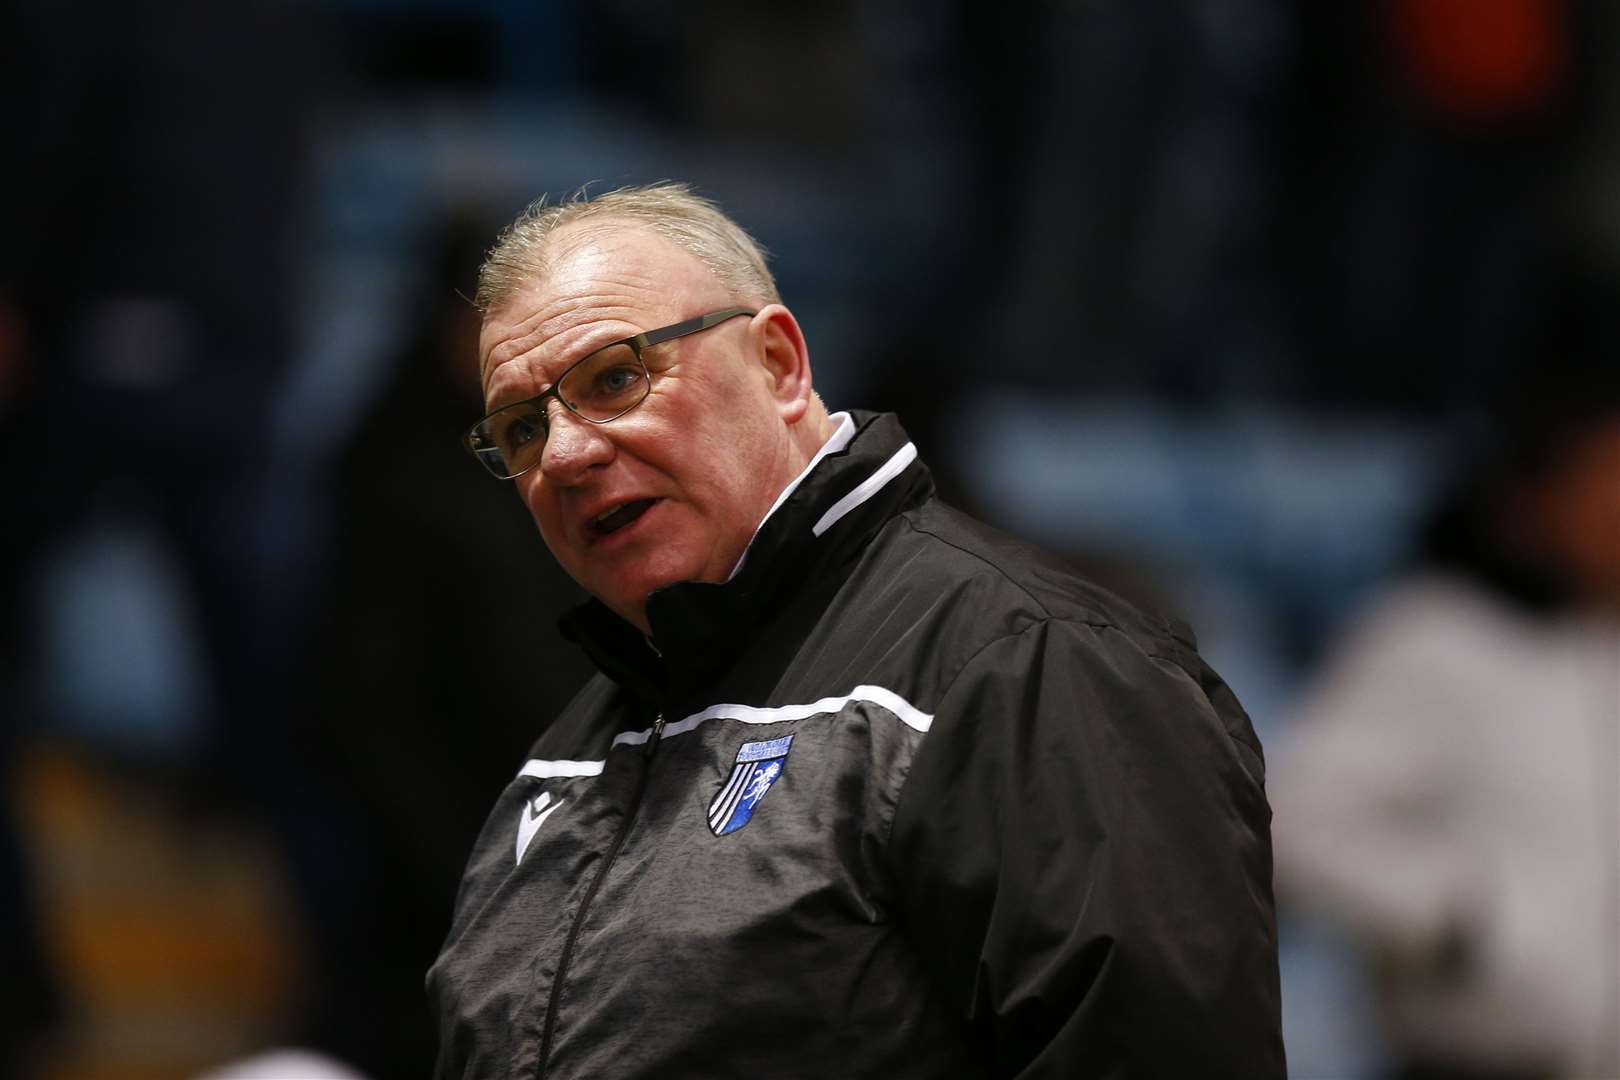 Gillingham boss Steve Evans will be without a game this weekend